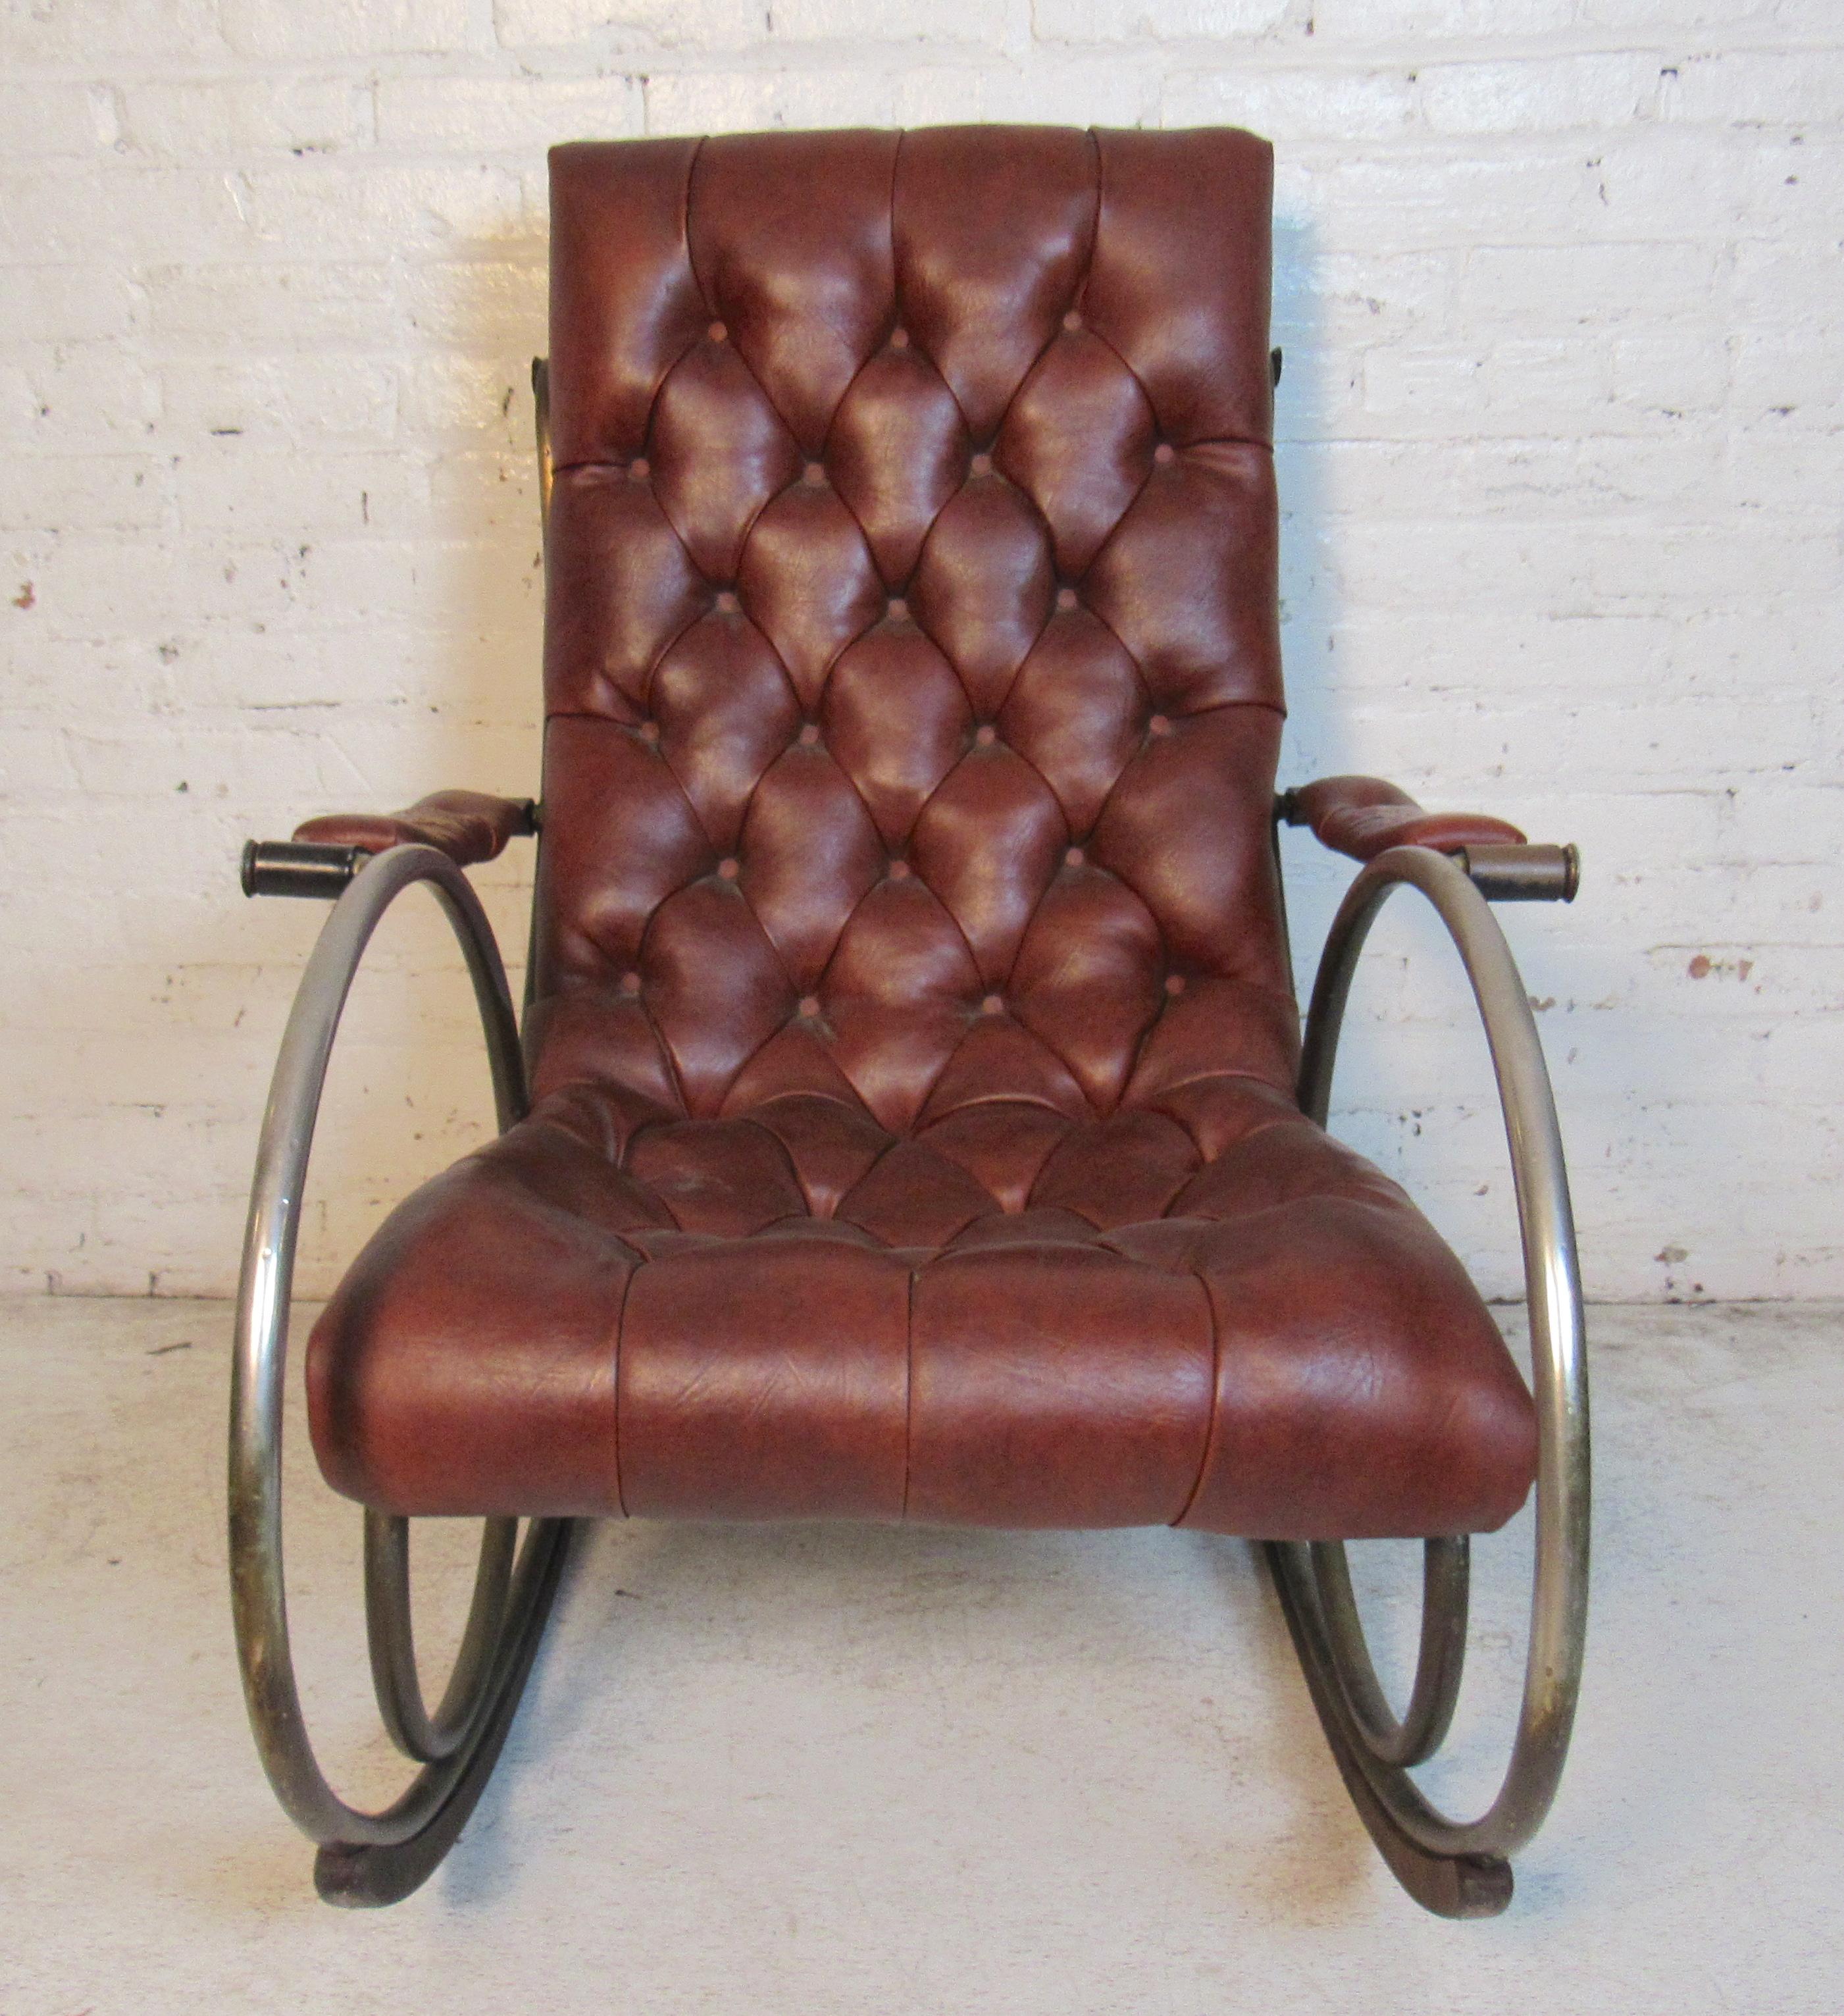 Beautifully designed sculptural rocker by Lee Woodard, with tufted leather body and brass railing.
(Please confirm item location - NY or NJ - with dealer).
 